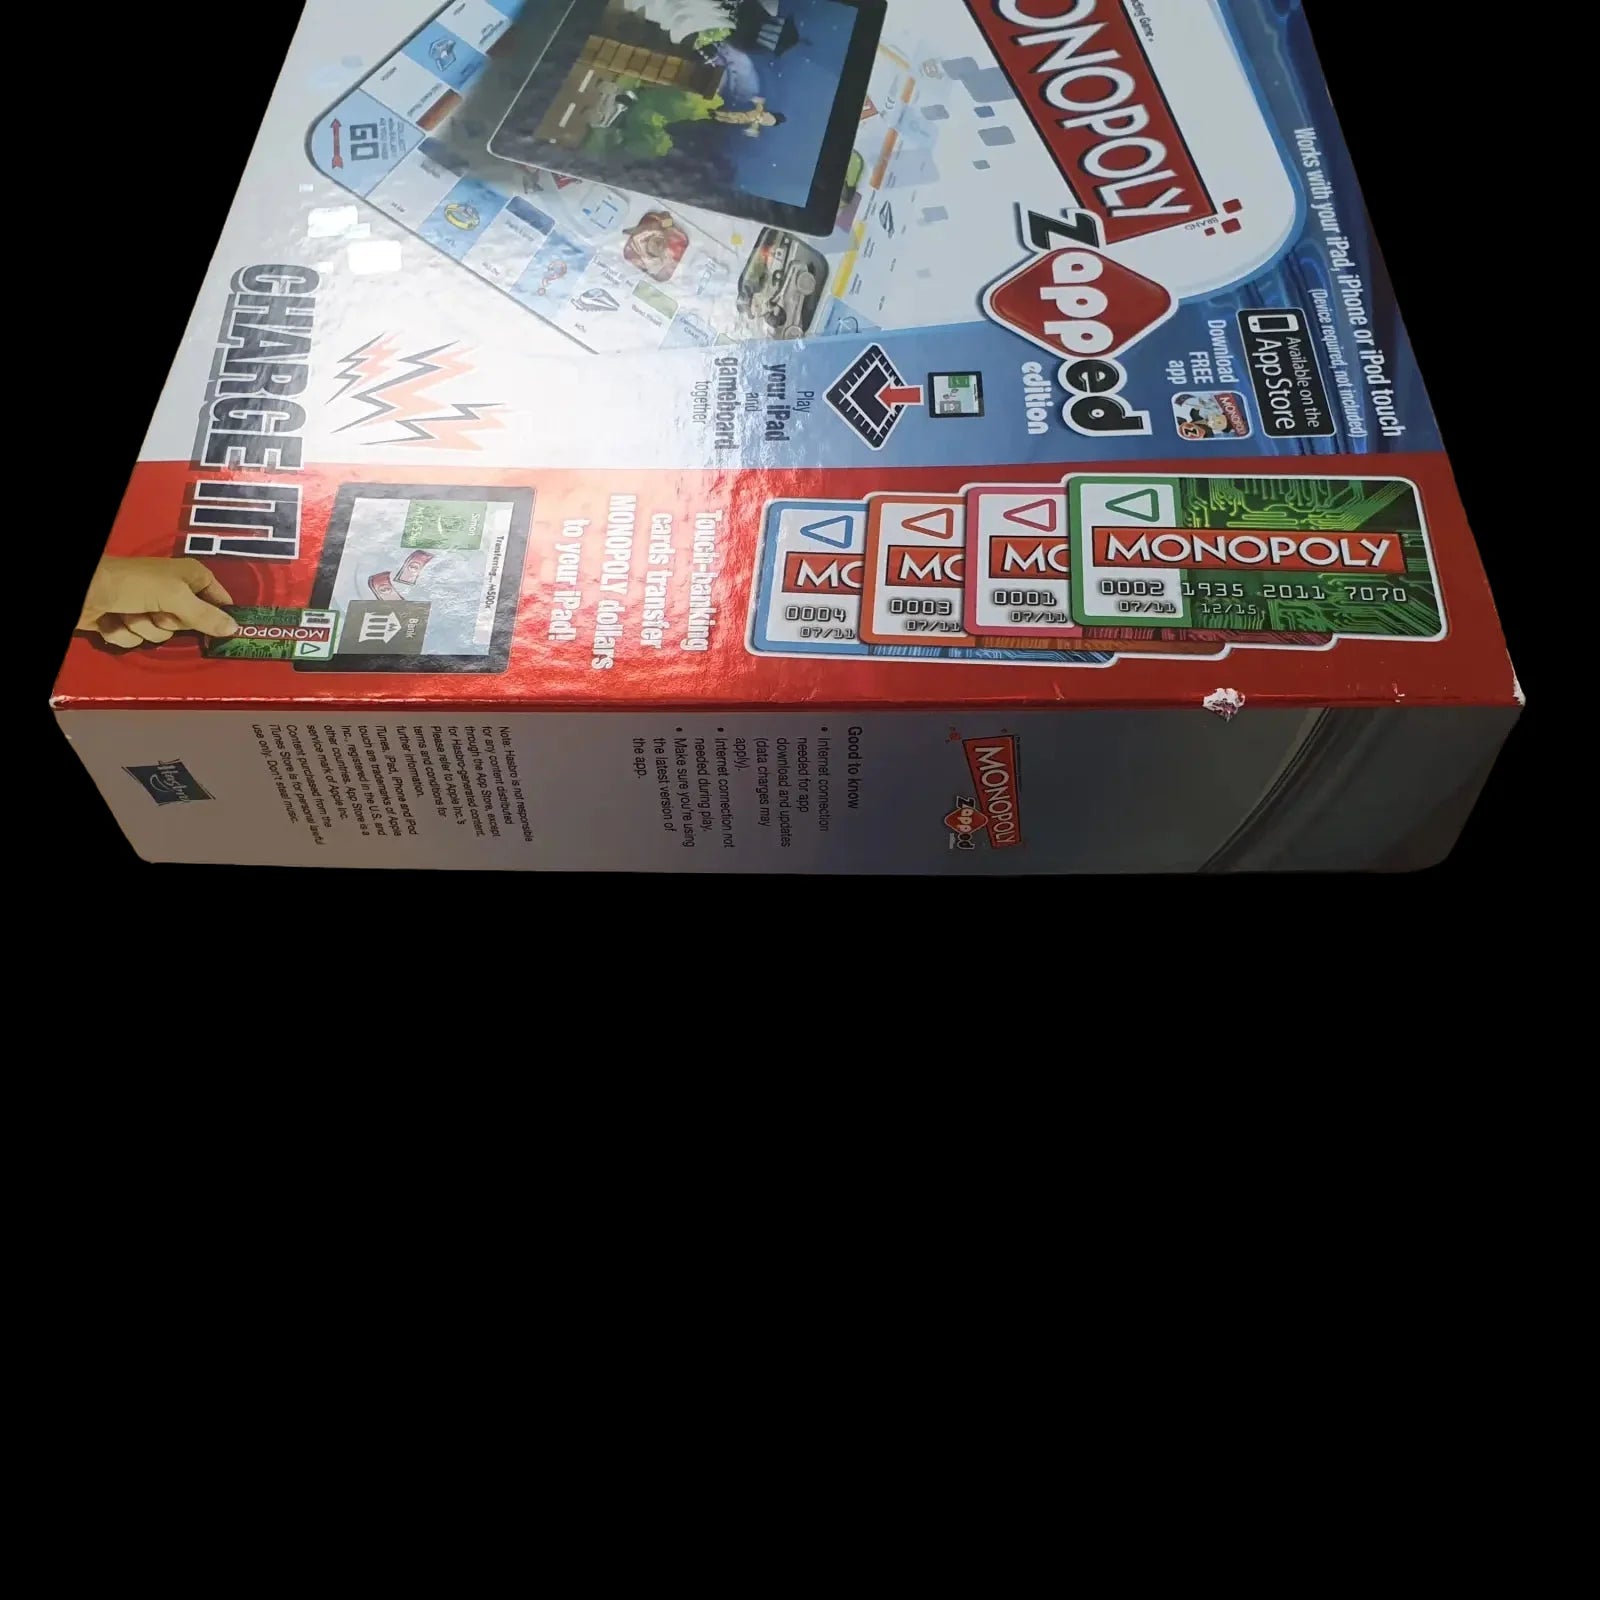 Hasbro Monopoly Zapped Edition Boxed Board Game Ipad Iphone